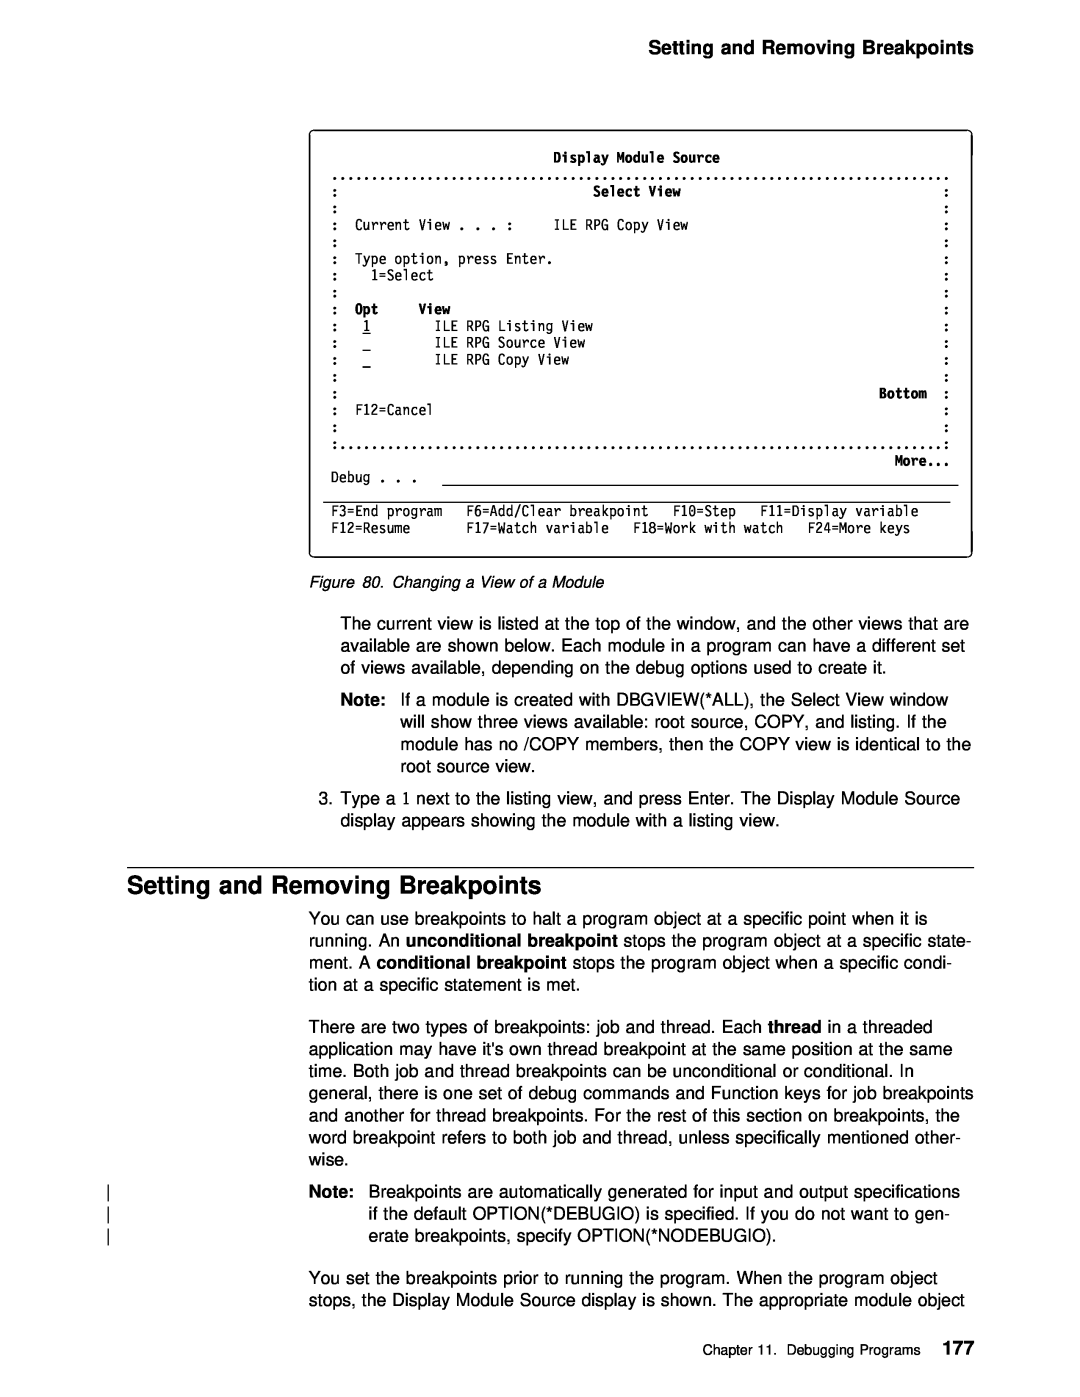 IBM AS/400 manual Setting and Removing Breakpoints 